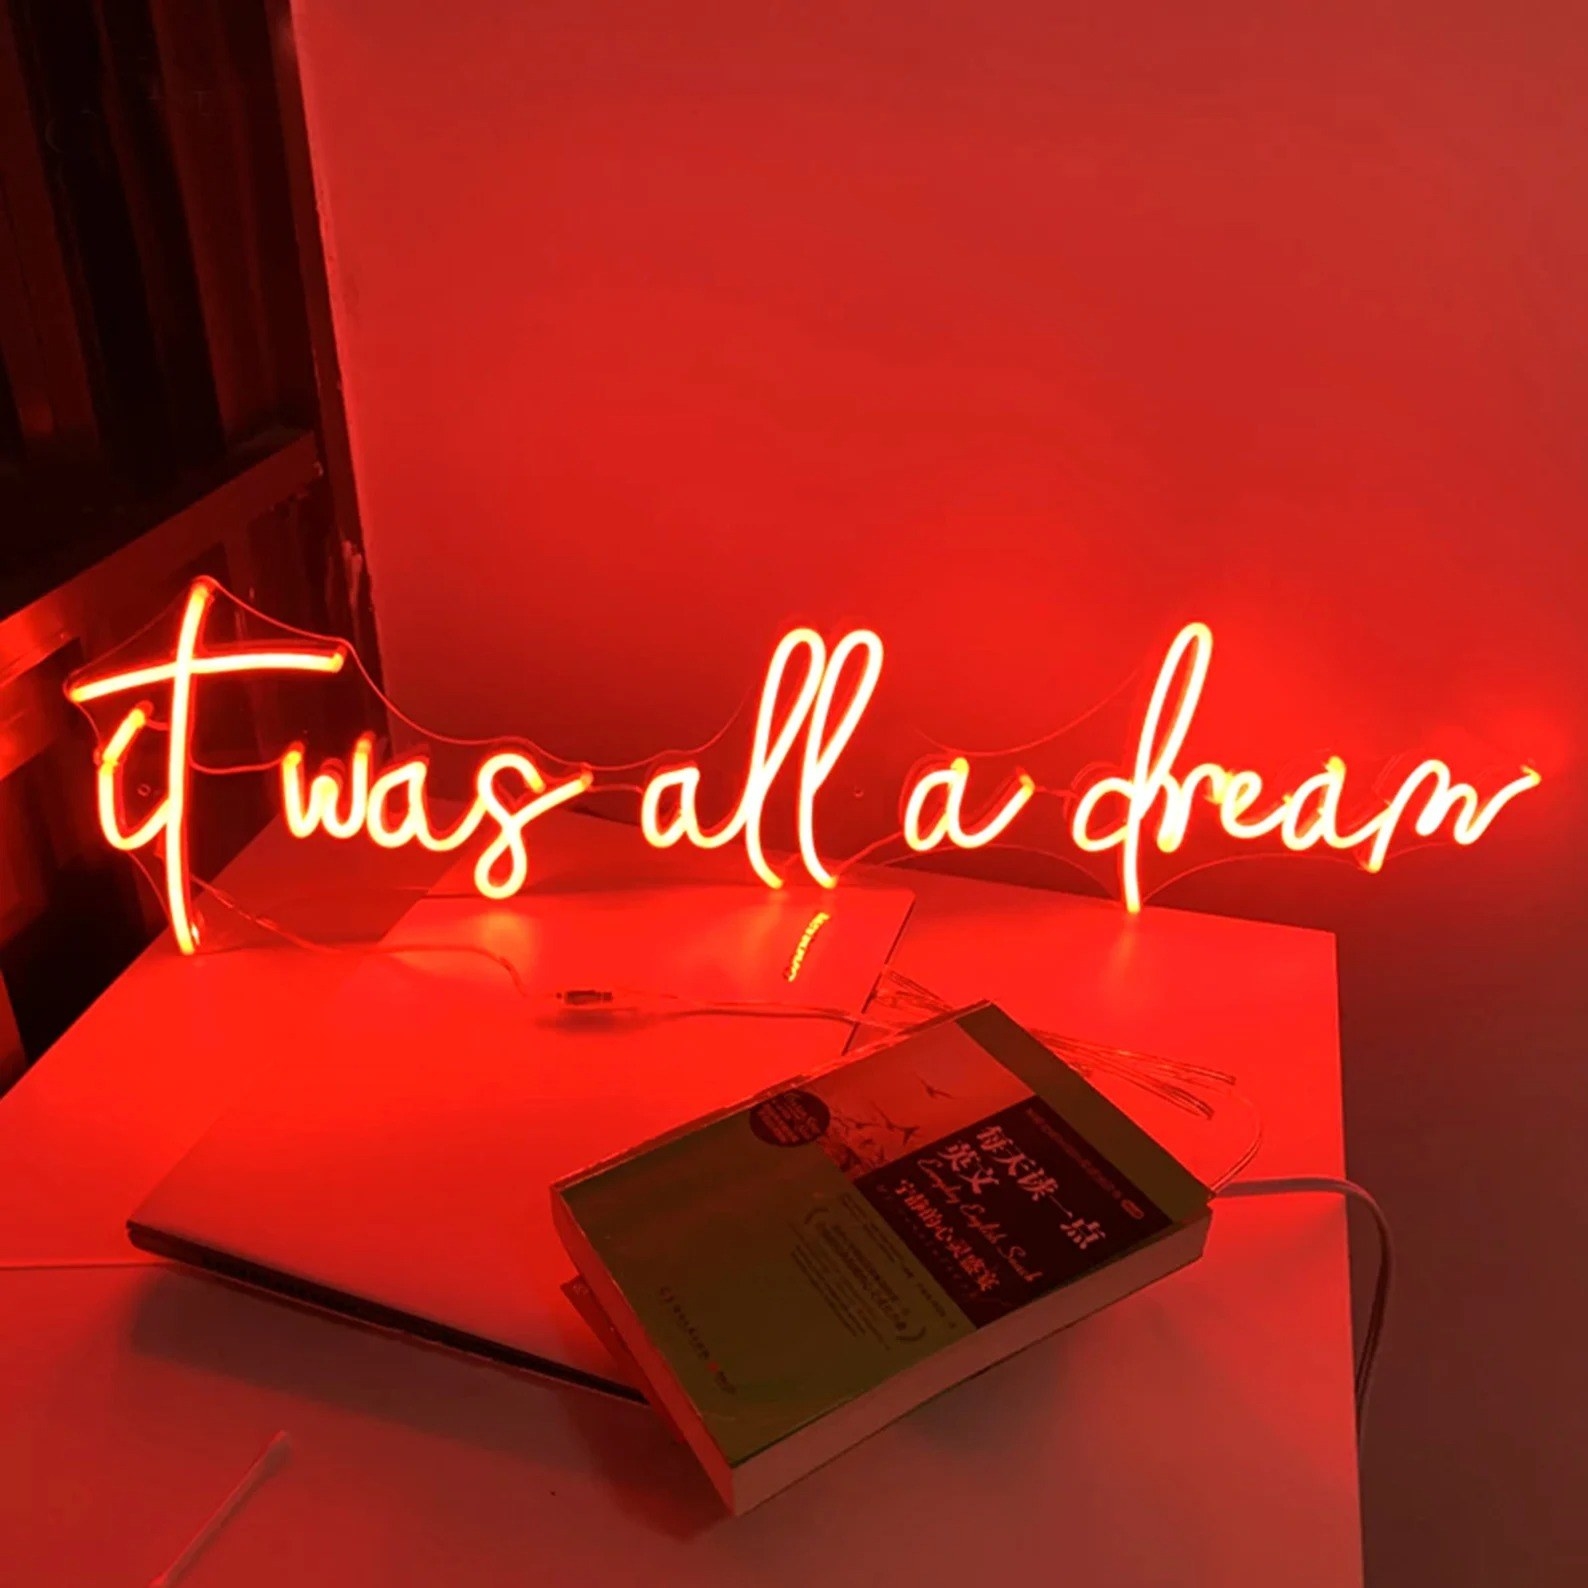 A red neon sign says &quot;it was all a dream&quot;